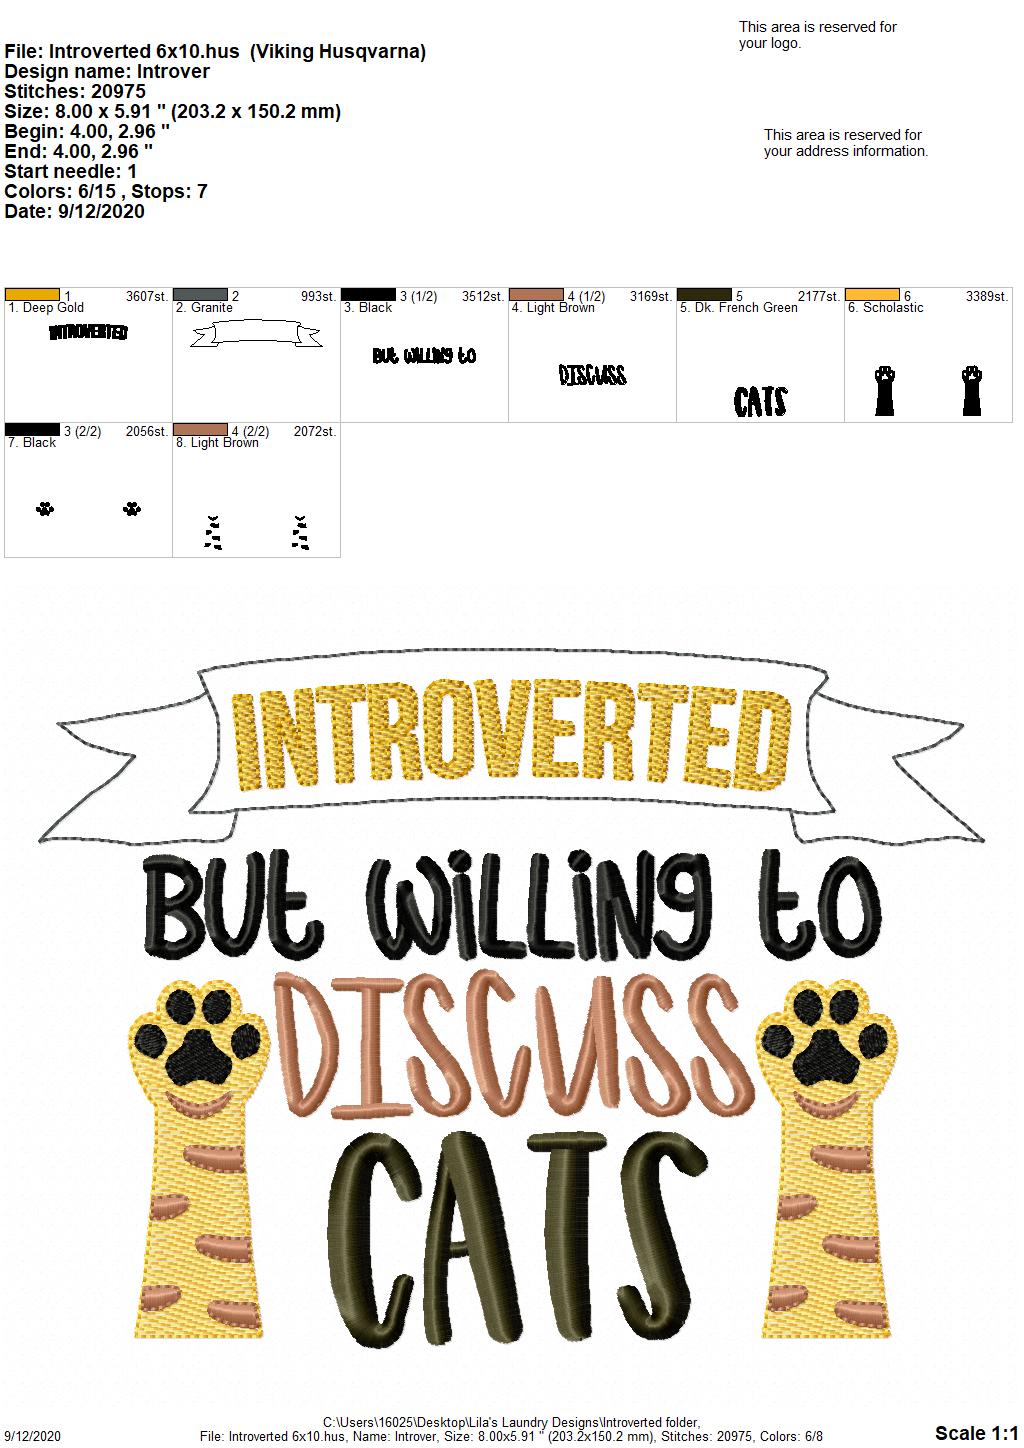 Introverted But Willing To Discuss Cats - 2 Sizes - Digital Embroidery Design